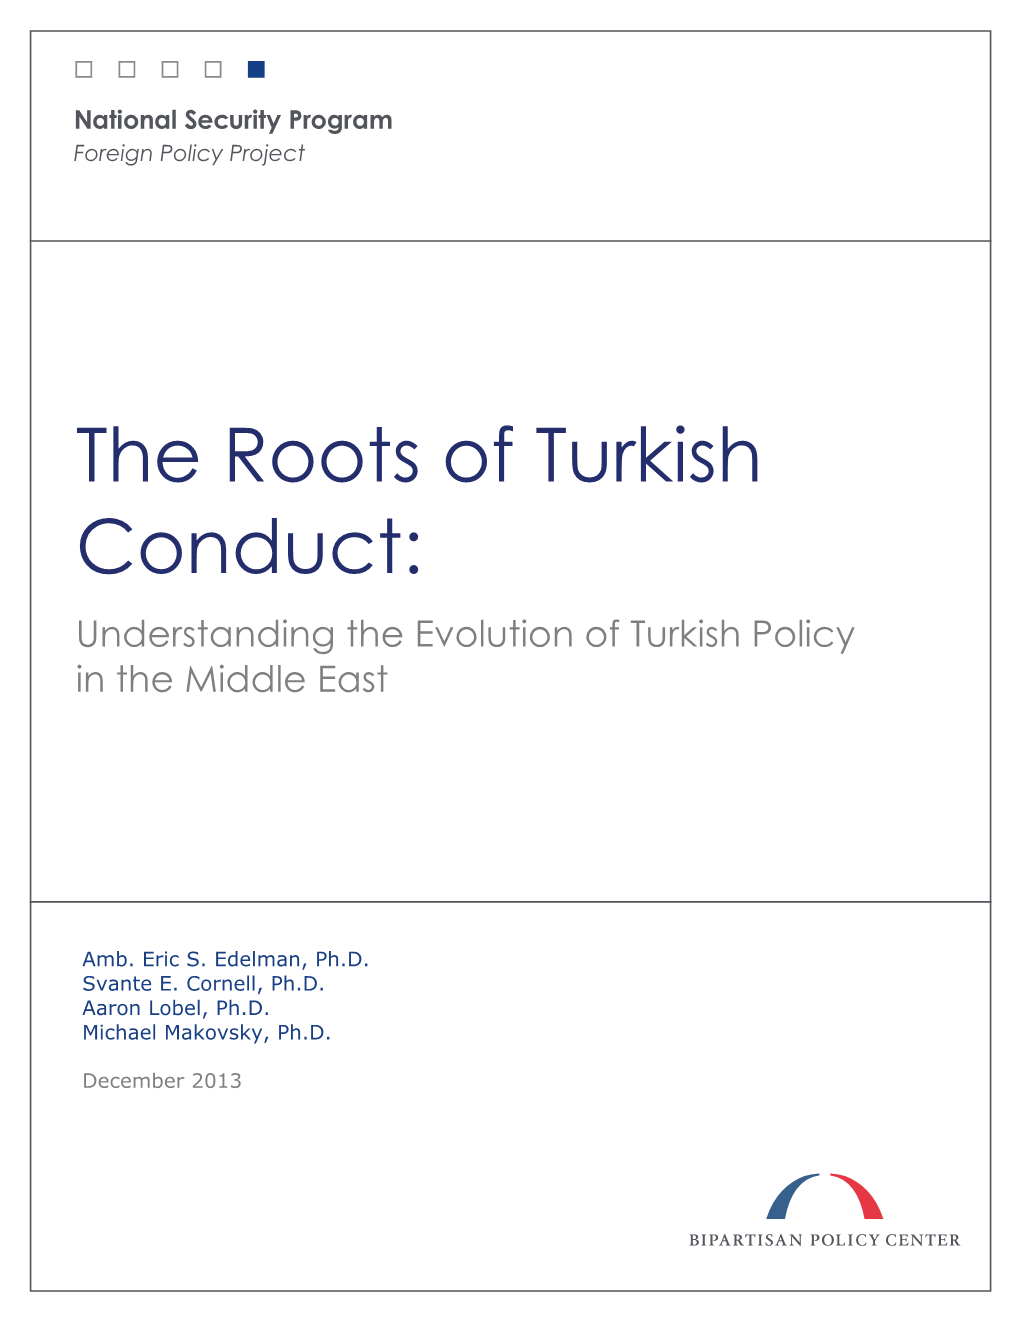 Understanding the Evolution of Turkish Policy in the Middle East